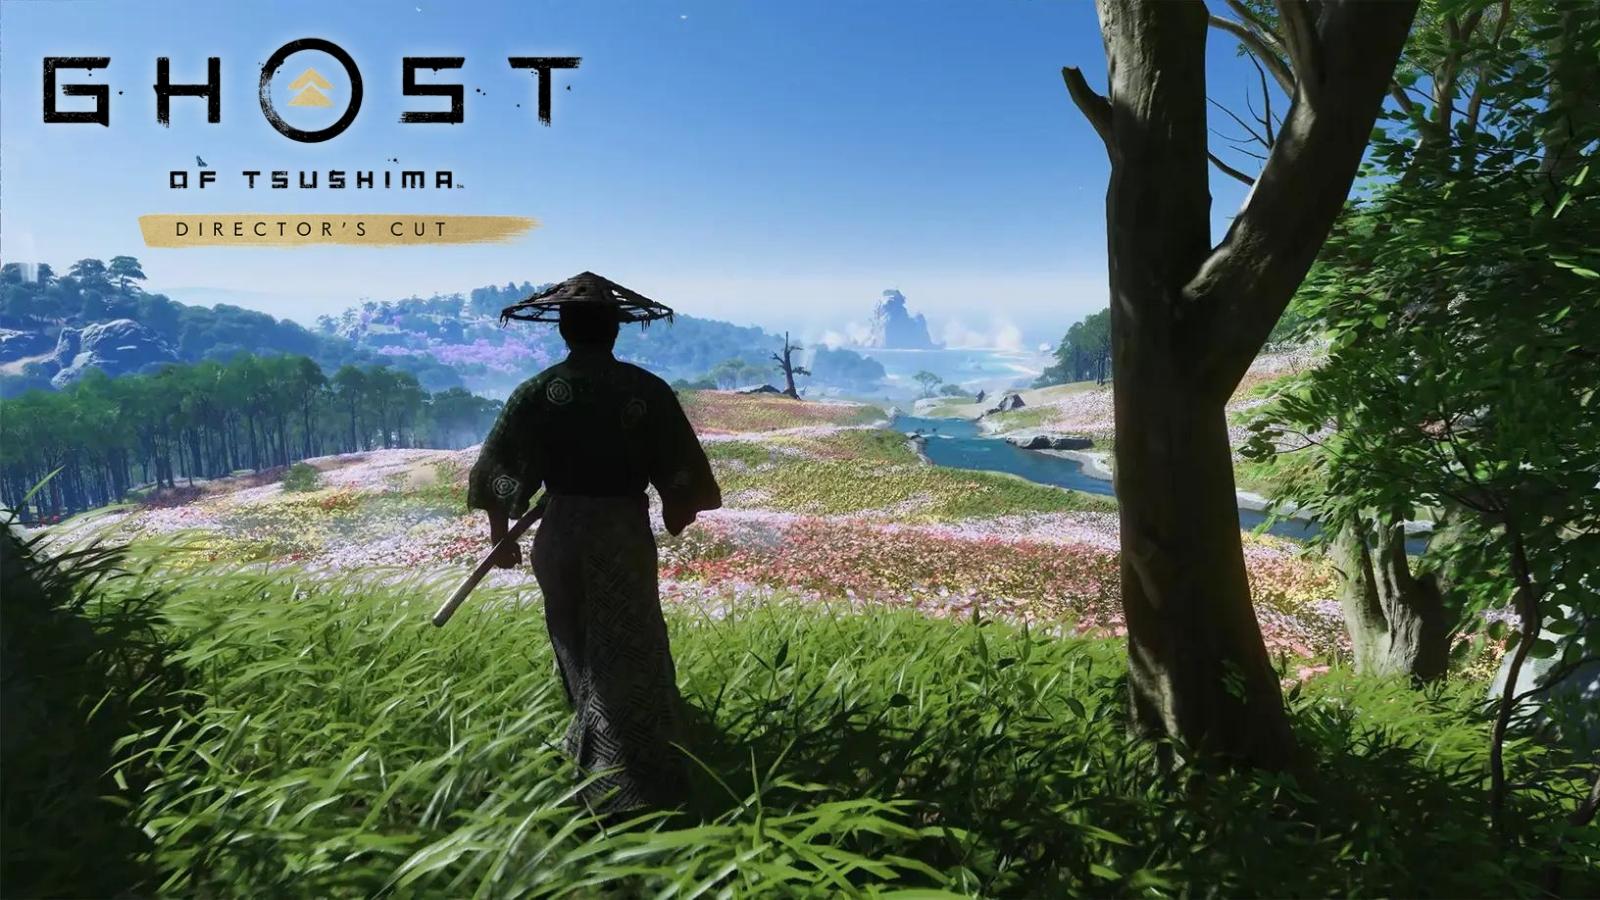 Ghost of Tsushima Director's cut cover on PC